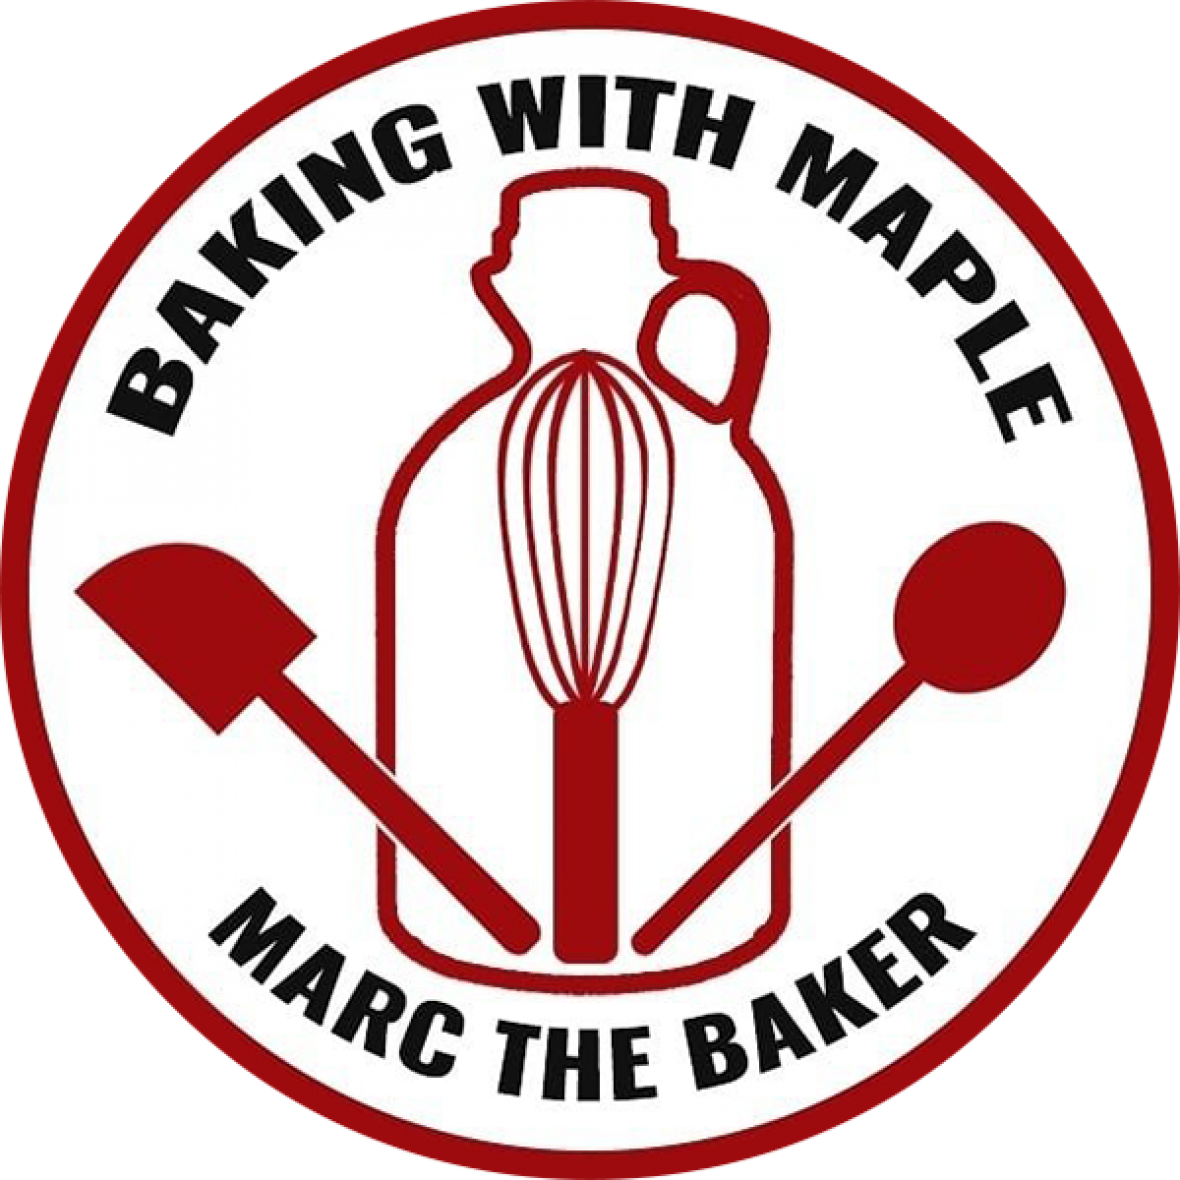 Baking With Maple - Marc The Baker